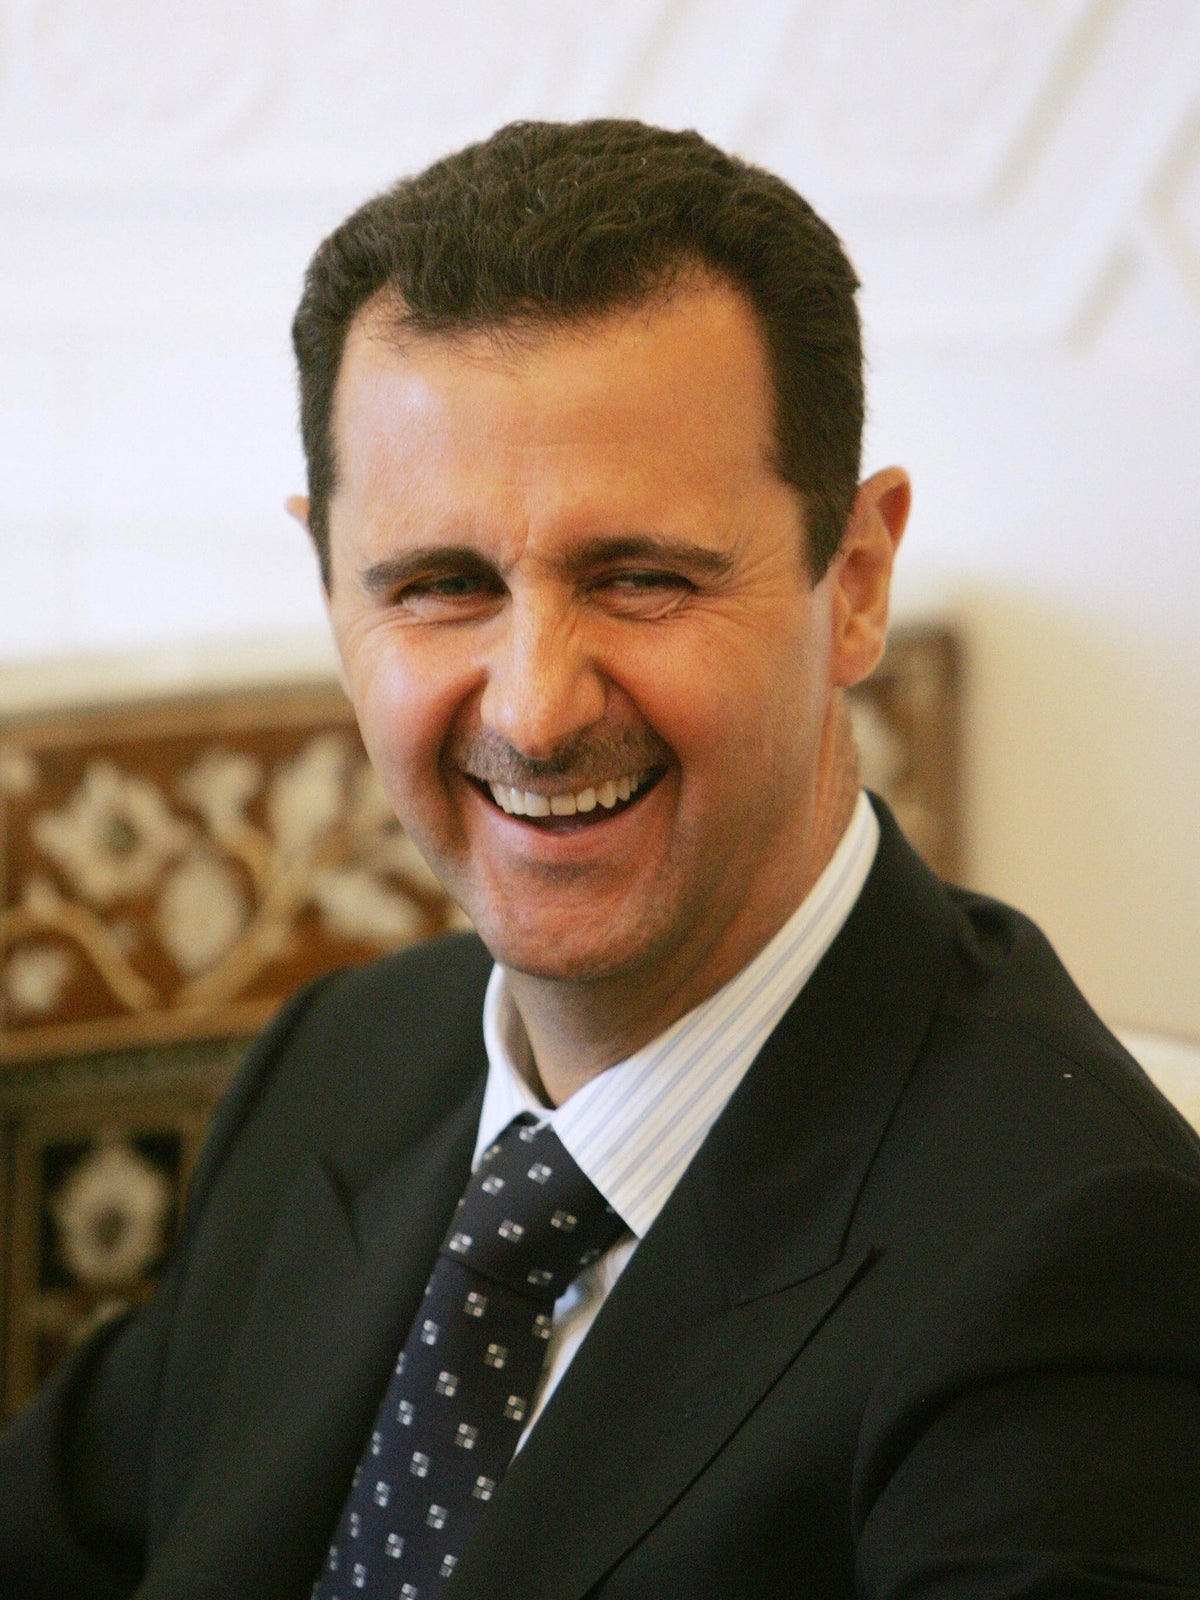 #74 - Main news thread - conflicts, terrorism, crisis from around the globe - Page 11 Bashar-assad-syria-laugh